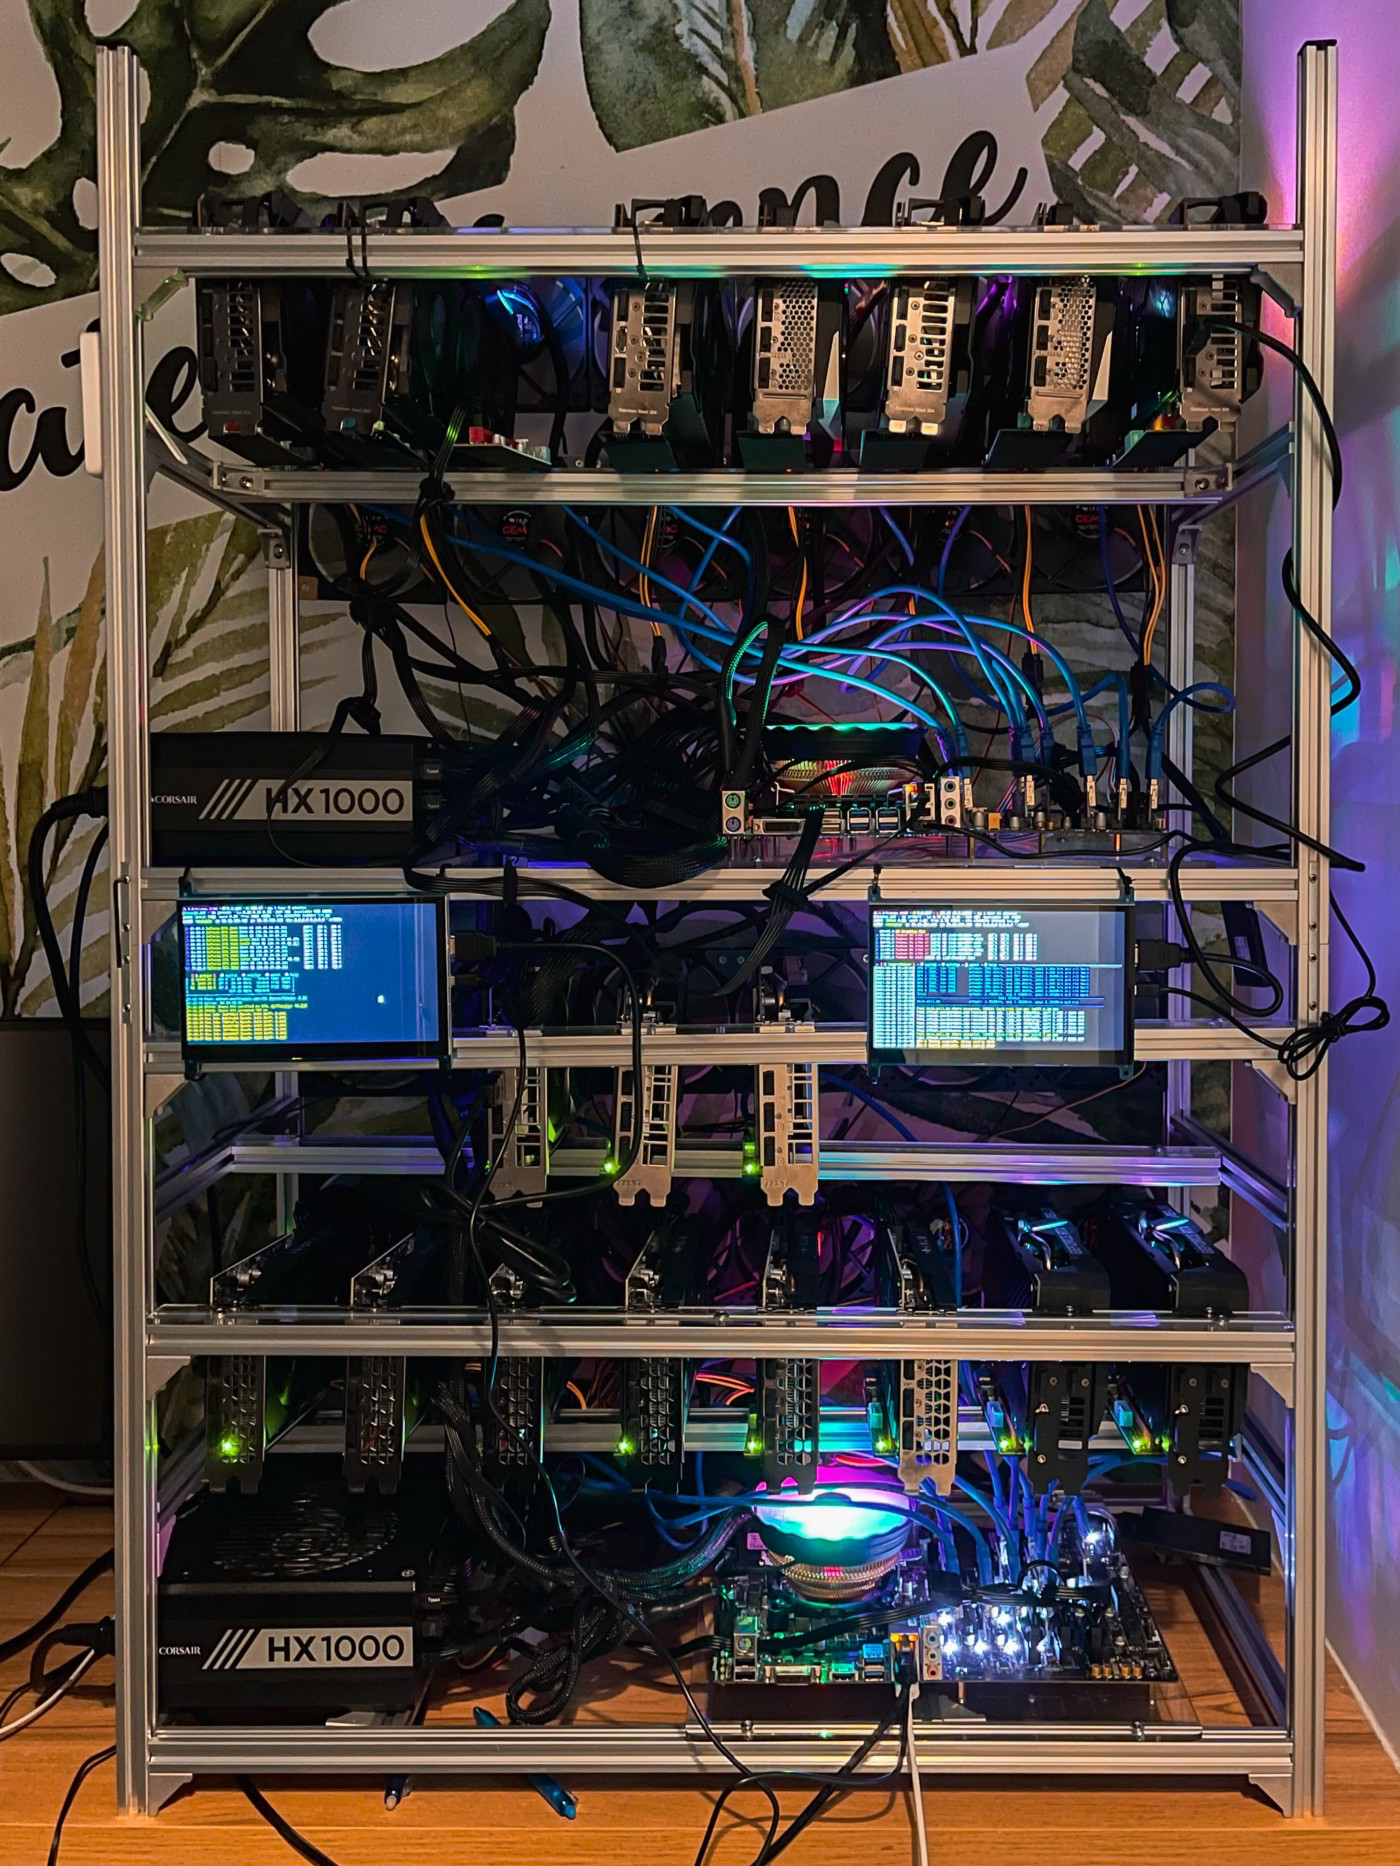 2 of my mining rigs at my workplace